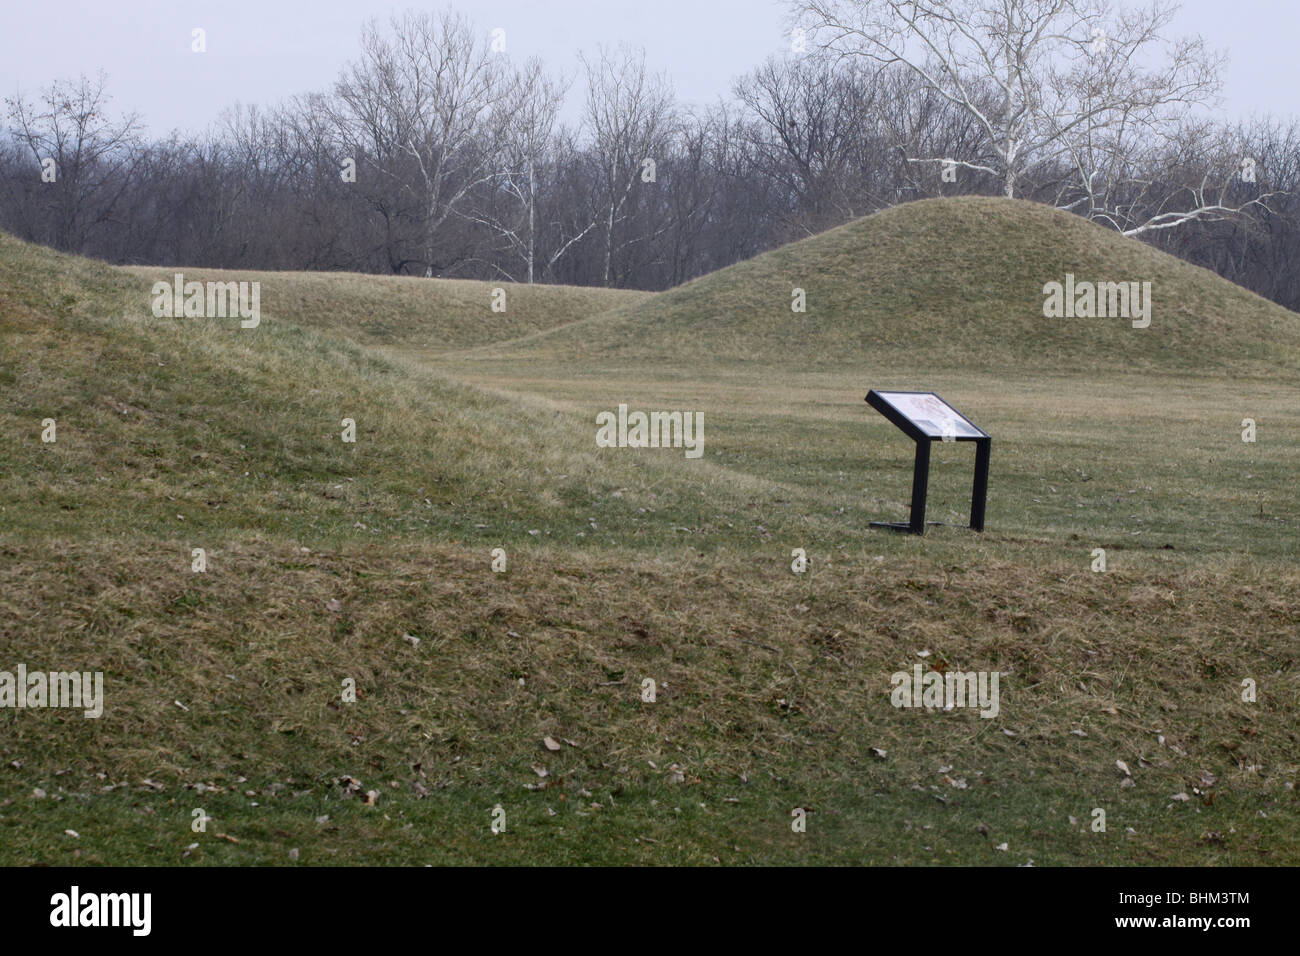 Hopewell Culture National Historical Park Indian mounds earthworks Chillicothe ohio Foto Stock